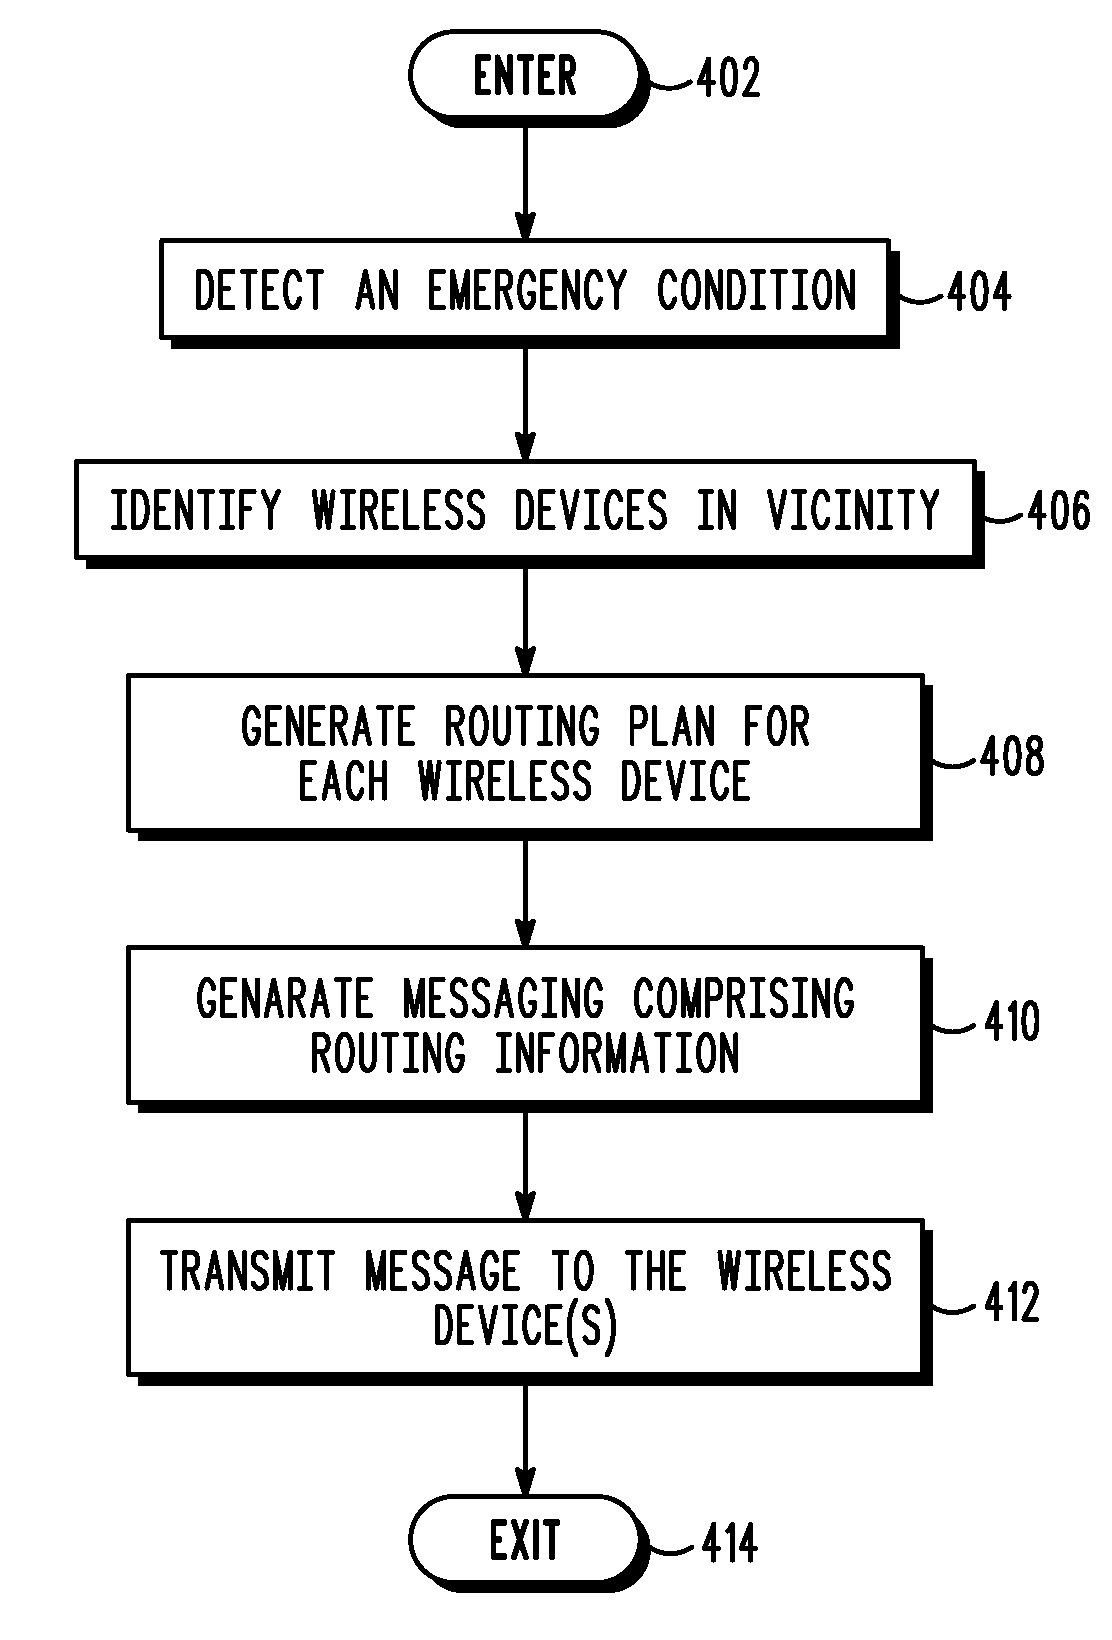 Emergency exit routing using wireless devices during emergency situations